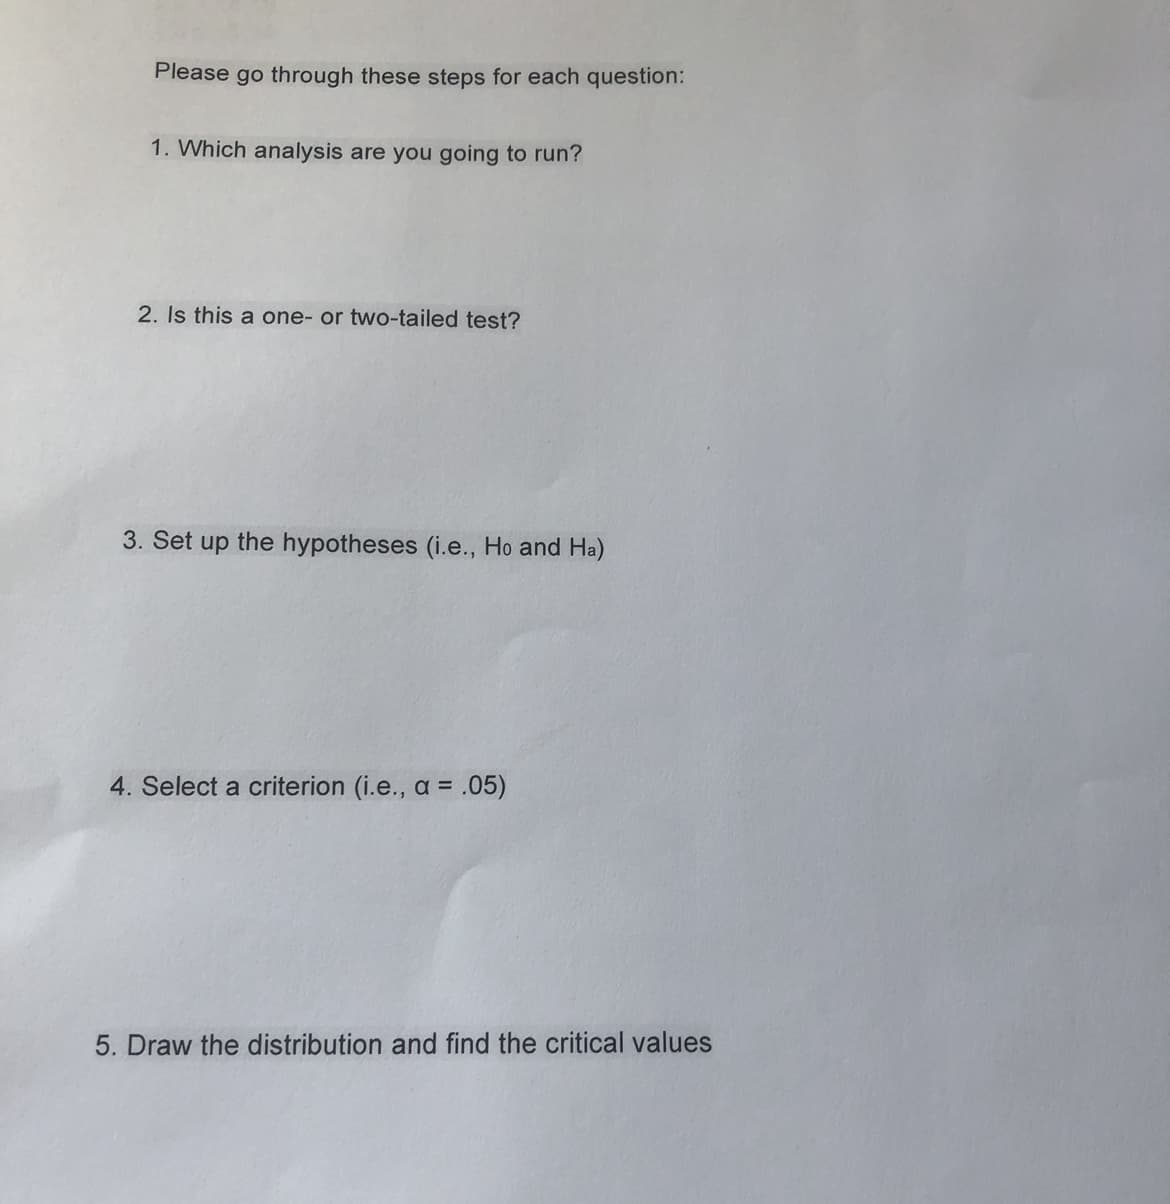 Please go through these steps for each question:
1. Which analysis are you going to run?
2. Is this a one- or two-tailed test?
3. Set up the hypotheses (i.e., Ho and Ha)
4. Select a criterion (i.e., a =
.05)
5. Draw the distribution and find the critical values
